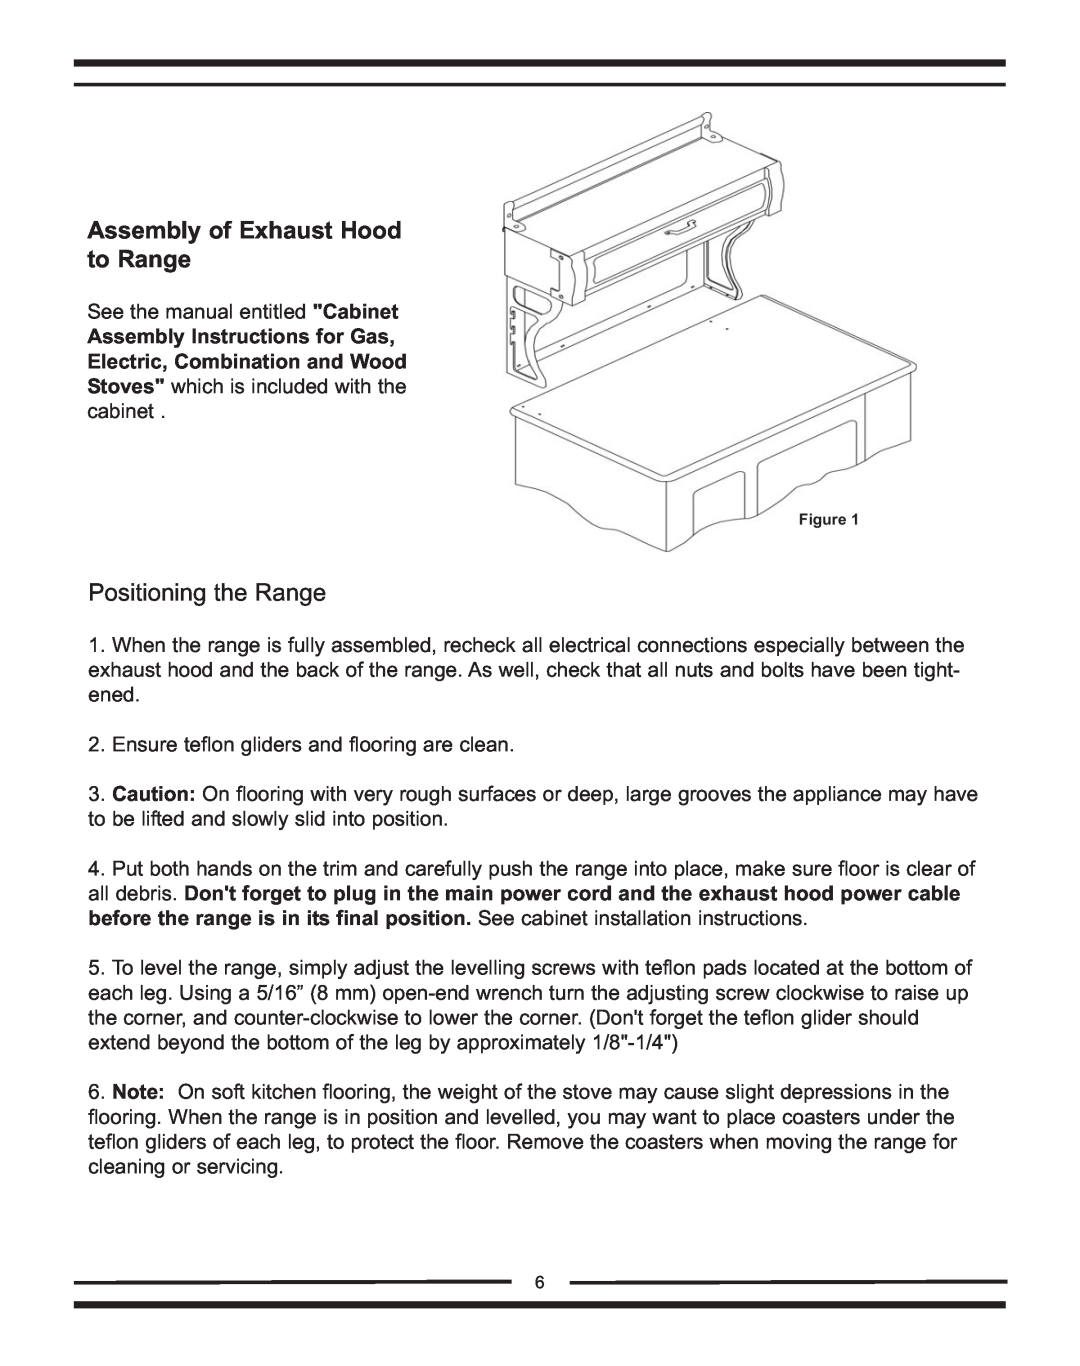 Heartland Bakeware 9200/7200 manual Assembly of Exhaust Hood to Range, Positioning the Range 